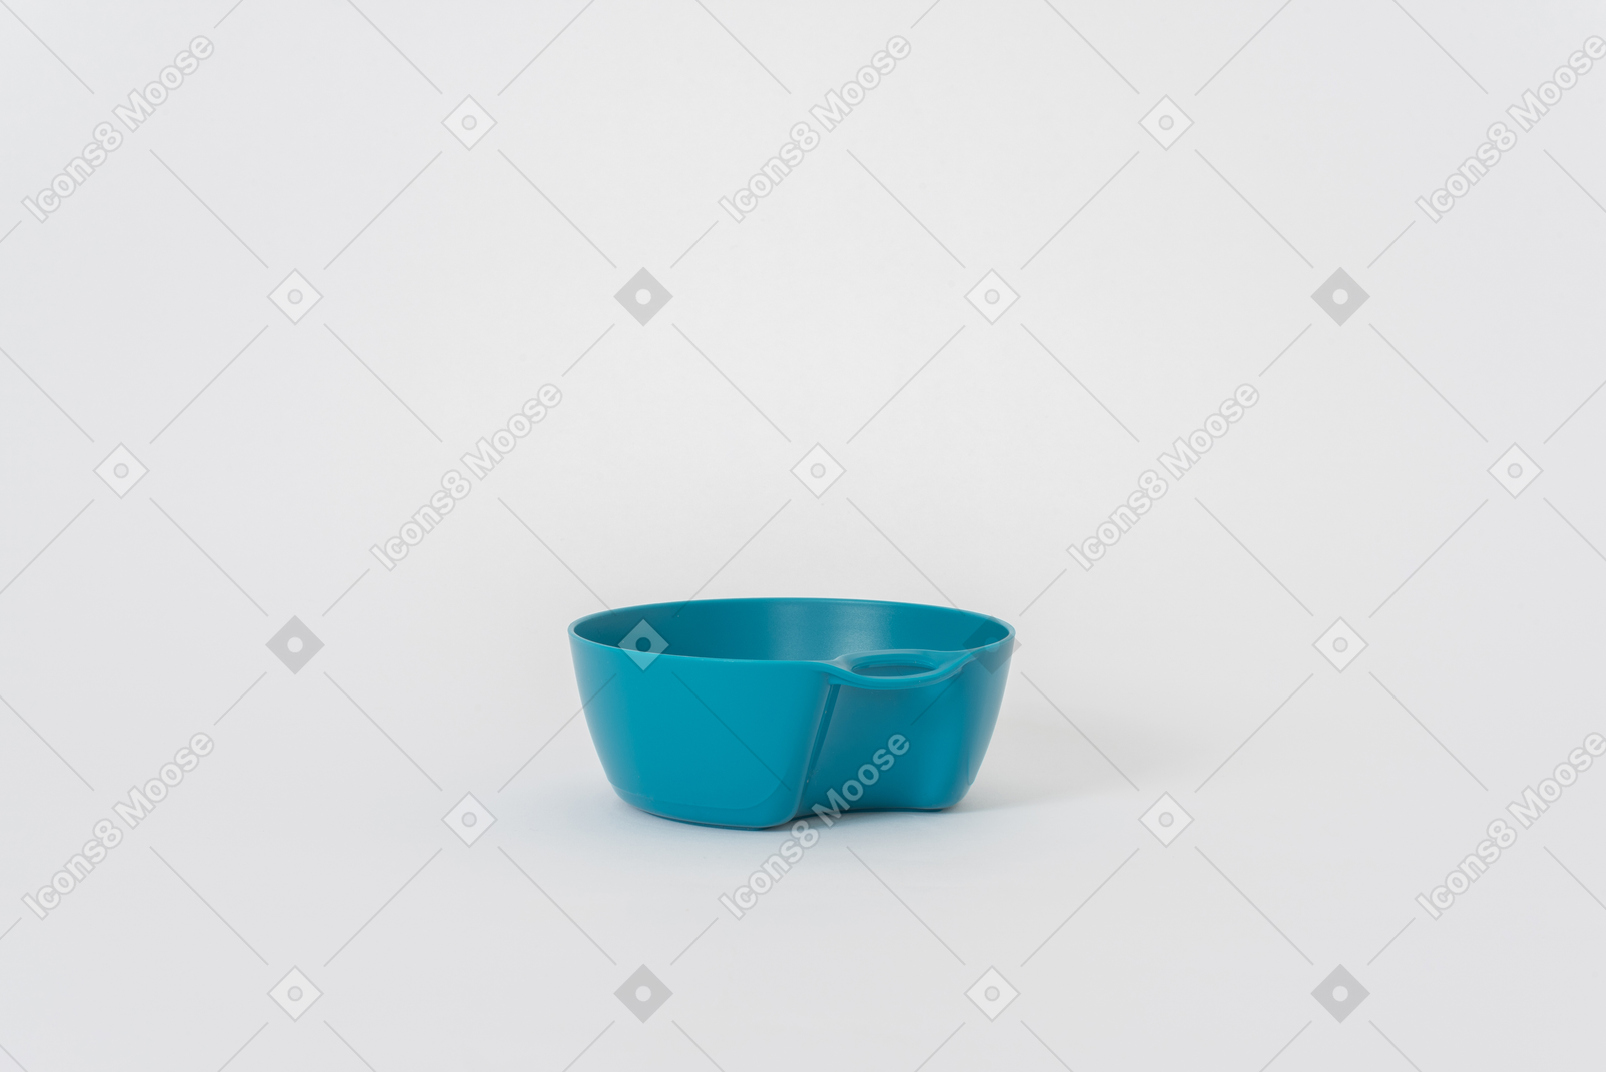 Plastic blue bowl on a white background